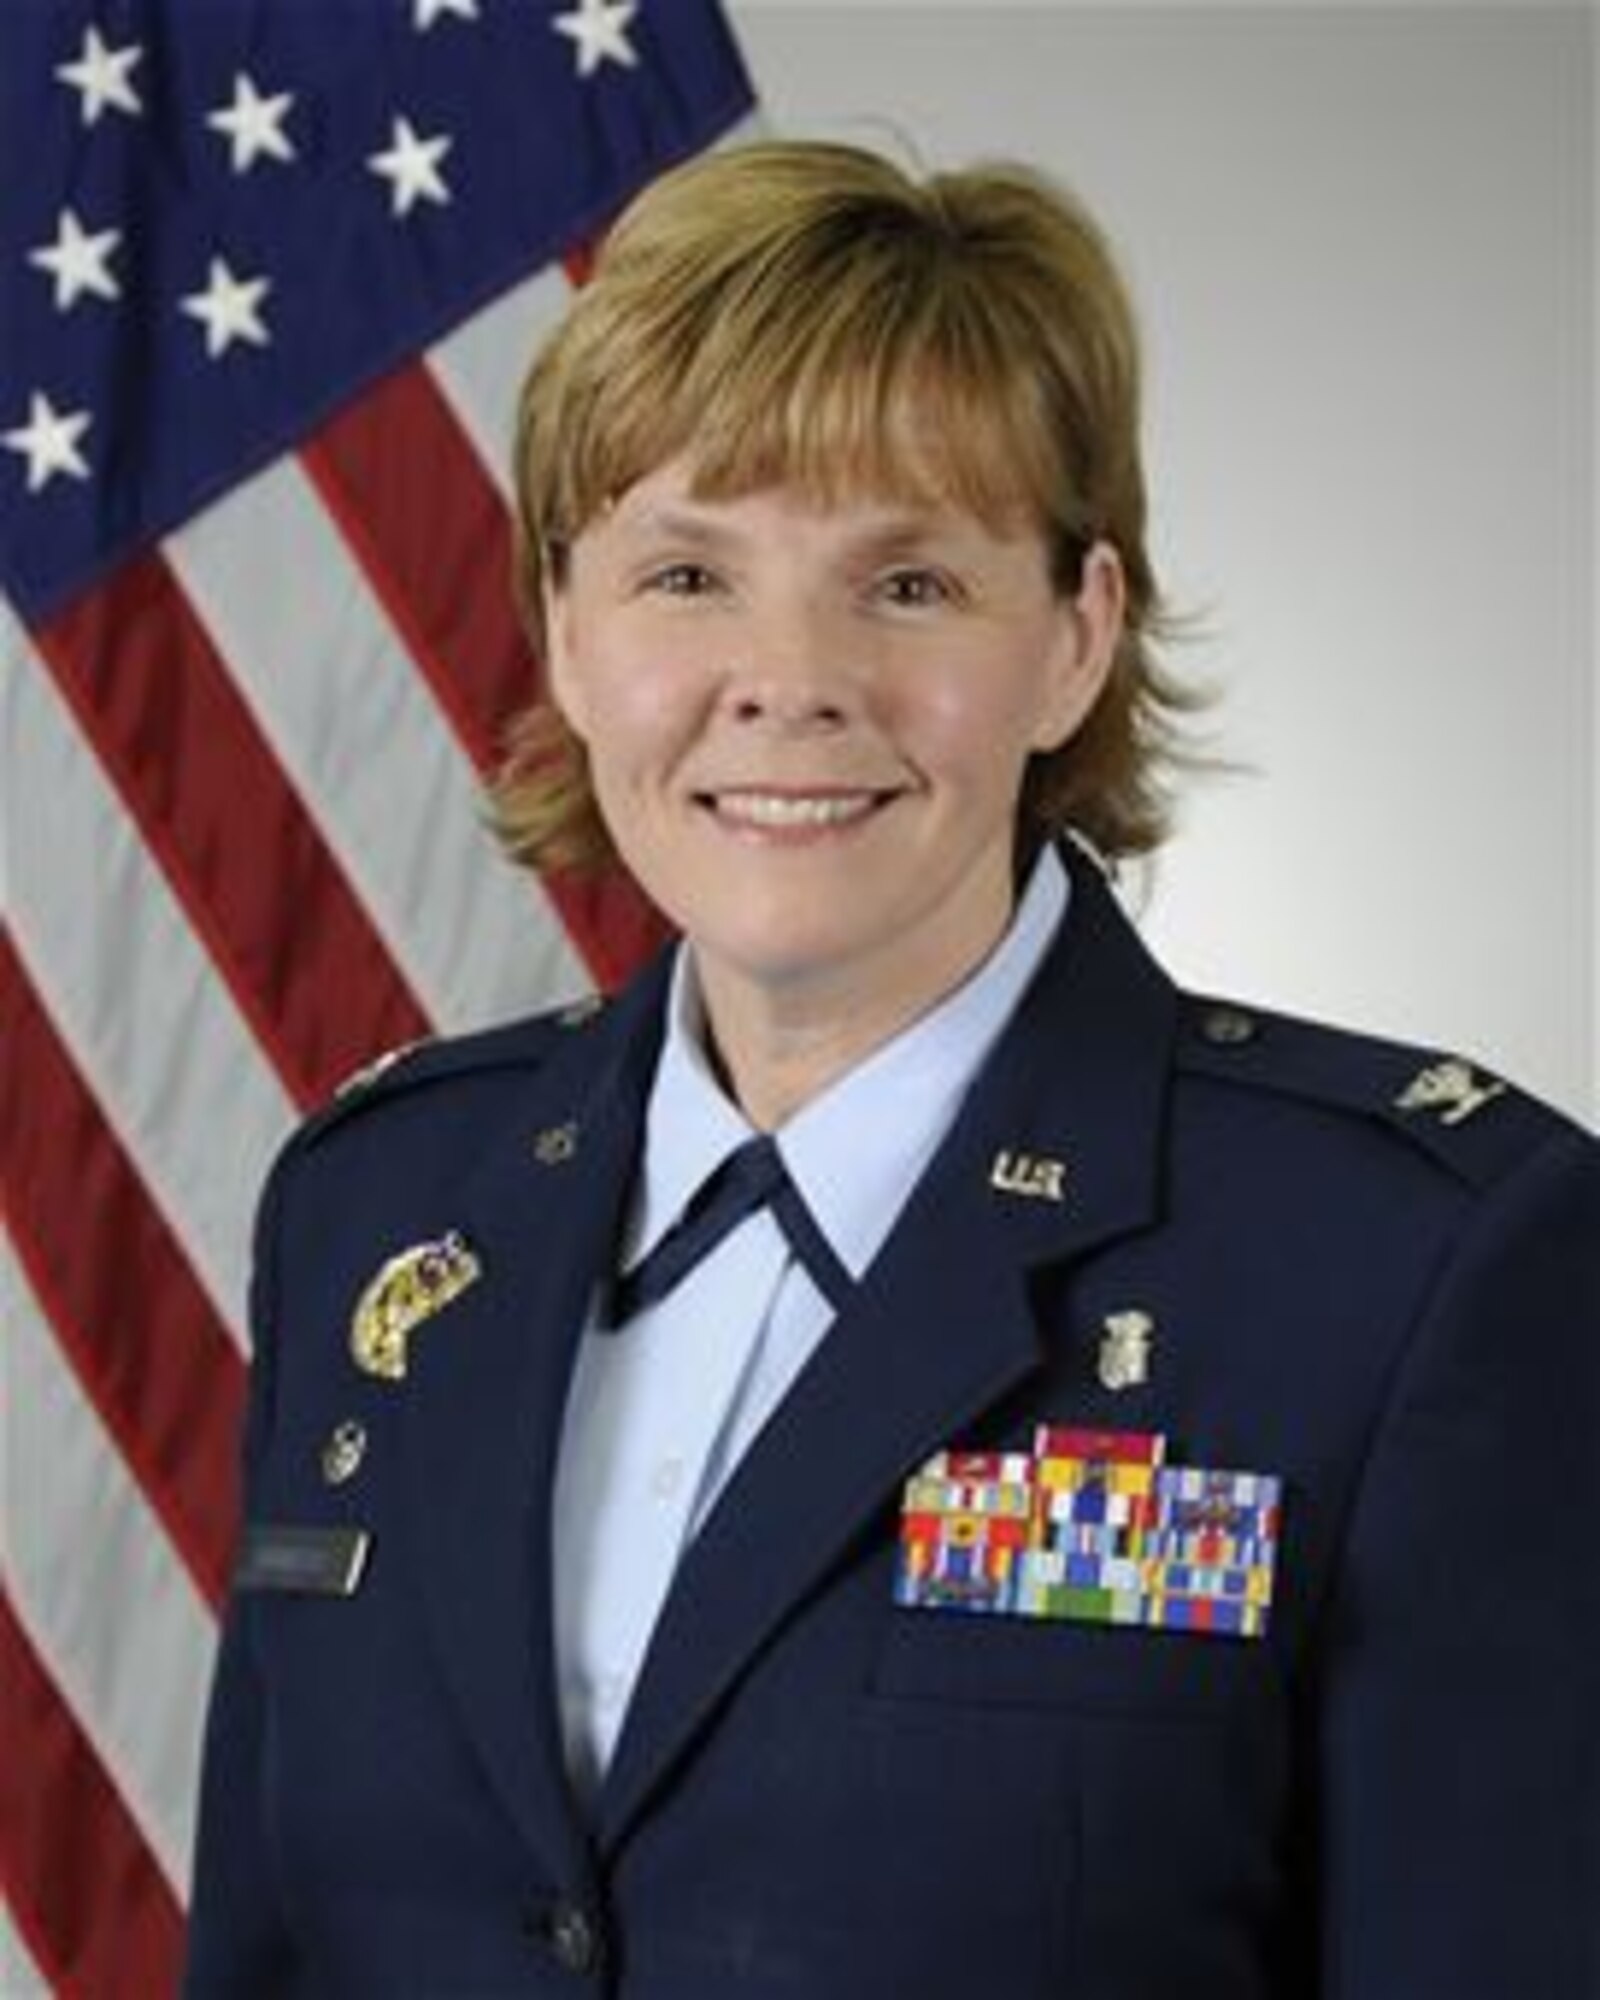 Col. Sharon Bannister is the Commander, 79th Medical Wing, Joint Base Andrews, Md. The wing consists of 1,550 Air Force health care professionals operating in eight locations and providing Air Force medical forces for expeditionary deployment, homeland defense operations and operations worldwide.